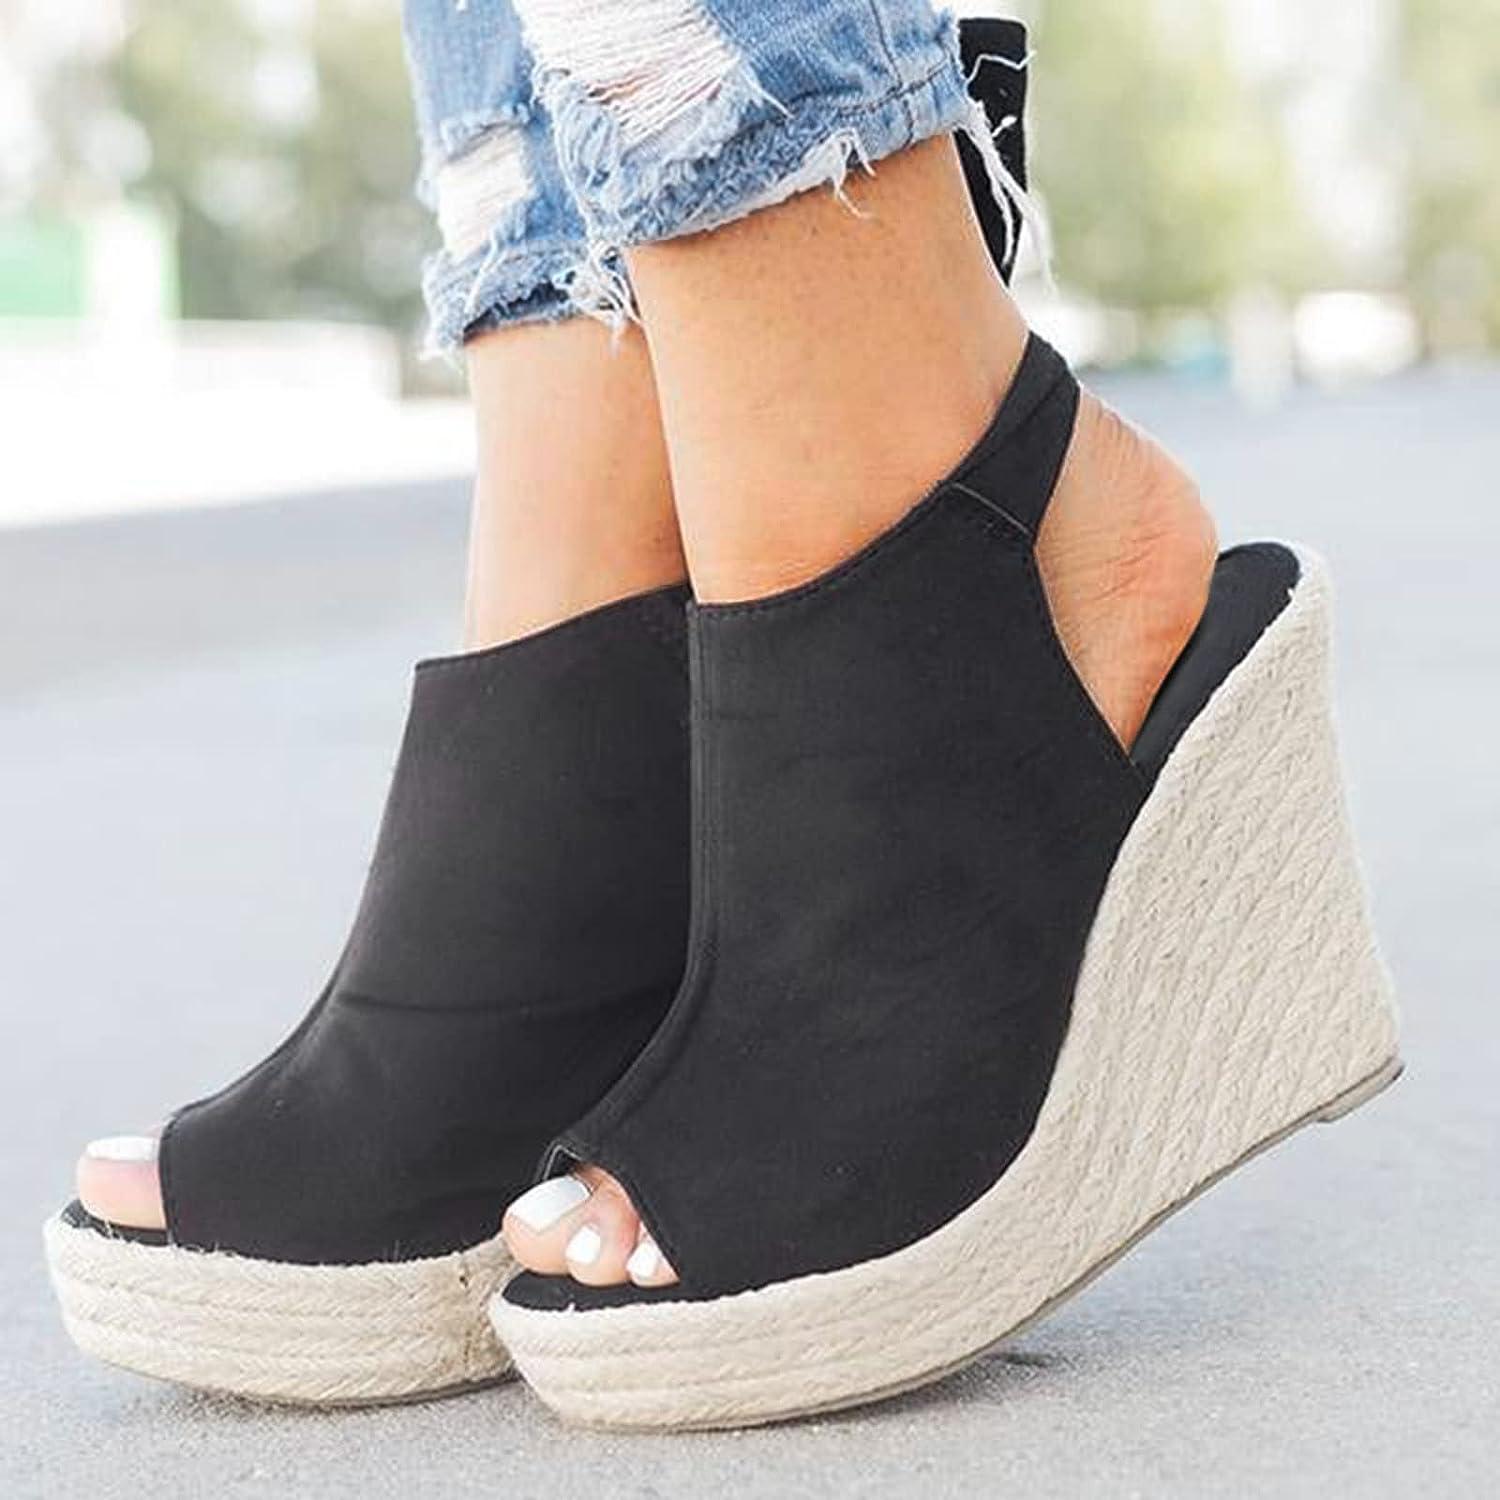 Wedge Sandals for Women Casual Summer Open Toe Buckle Ankle Strap